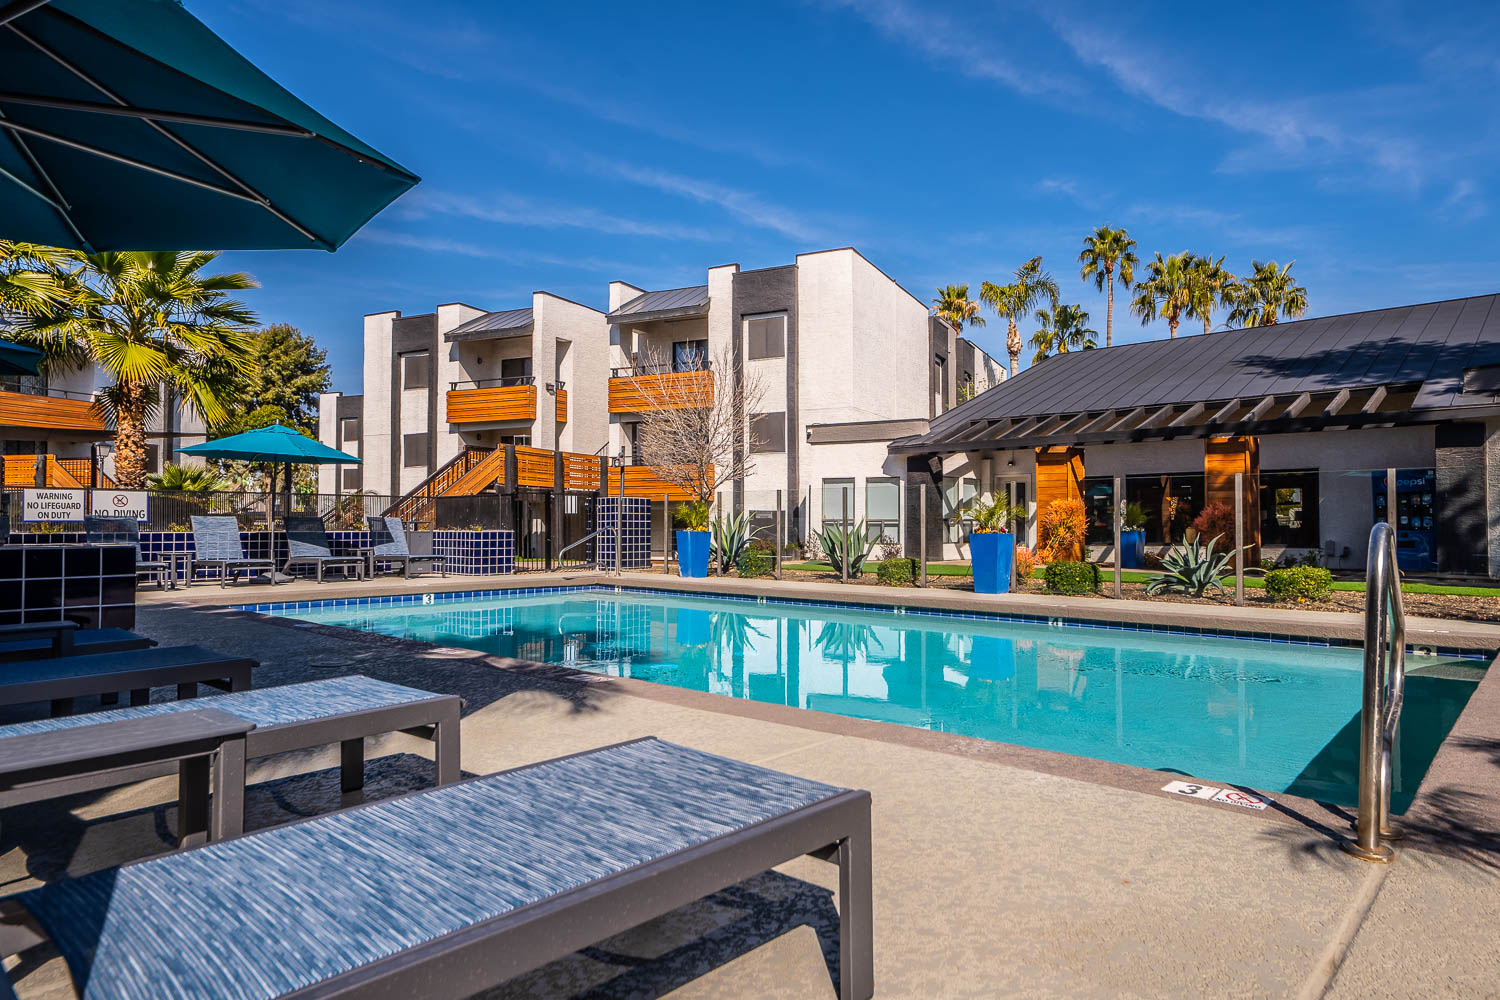 Lounge chairs by the resort-style swimming pool at Station 21 Apartments in Mesa, Arizona